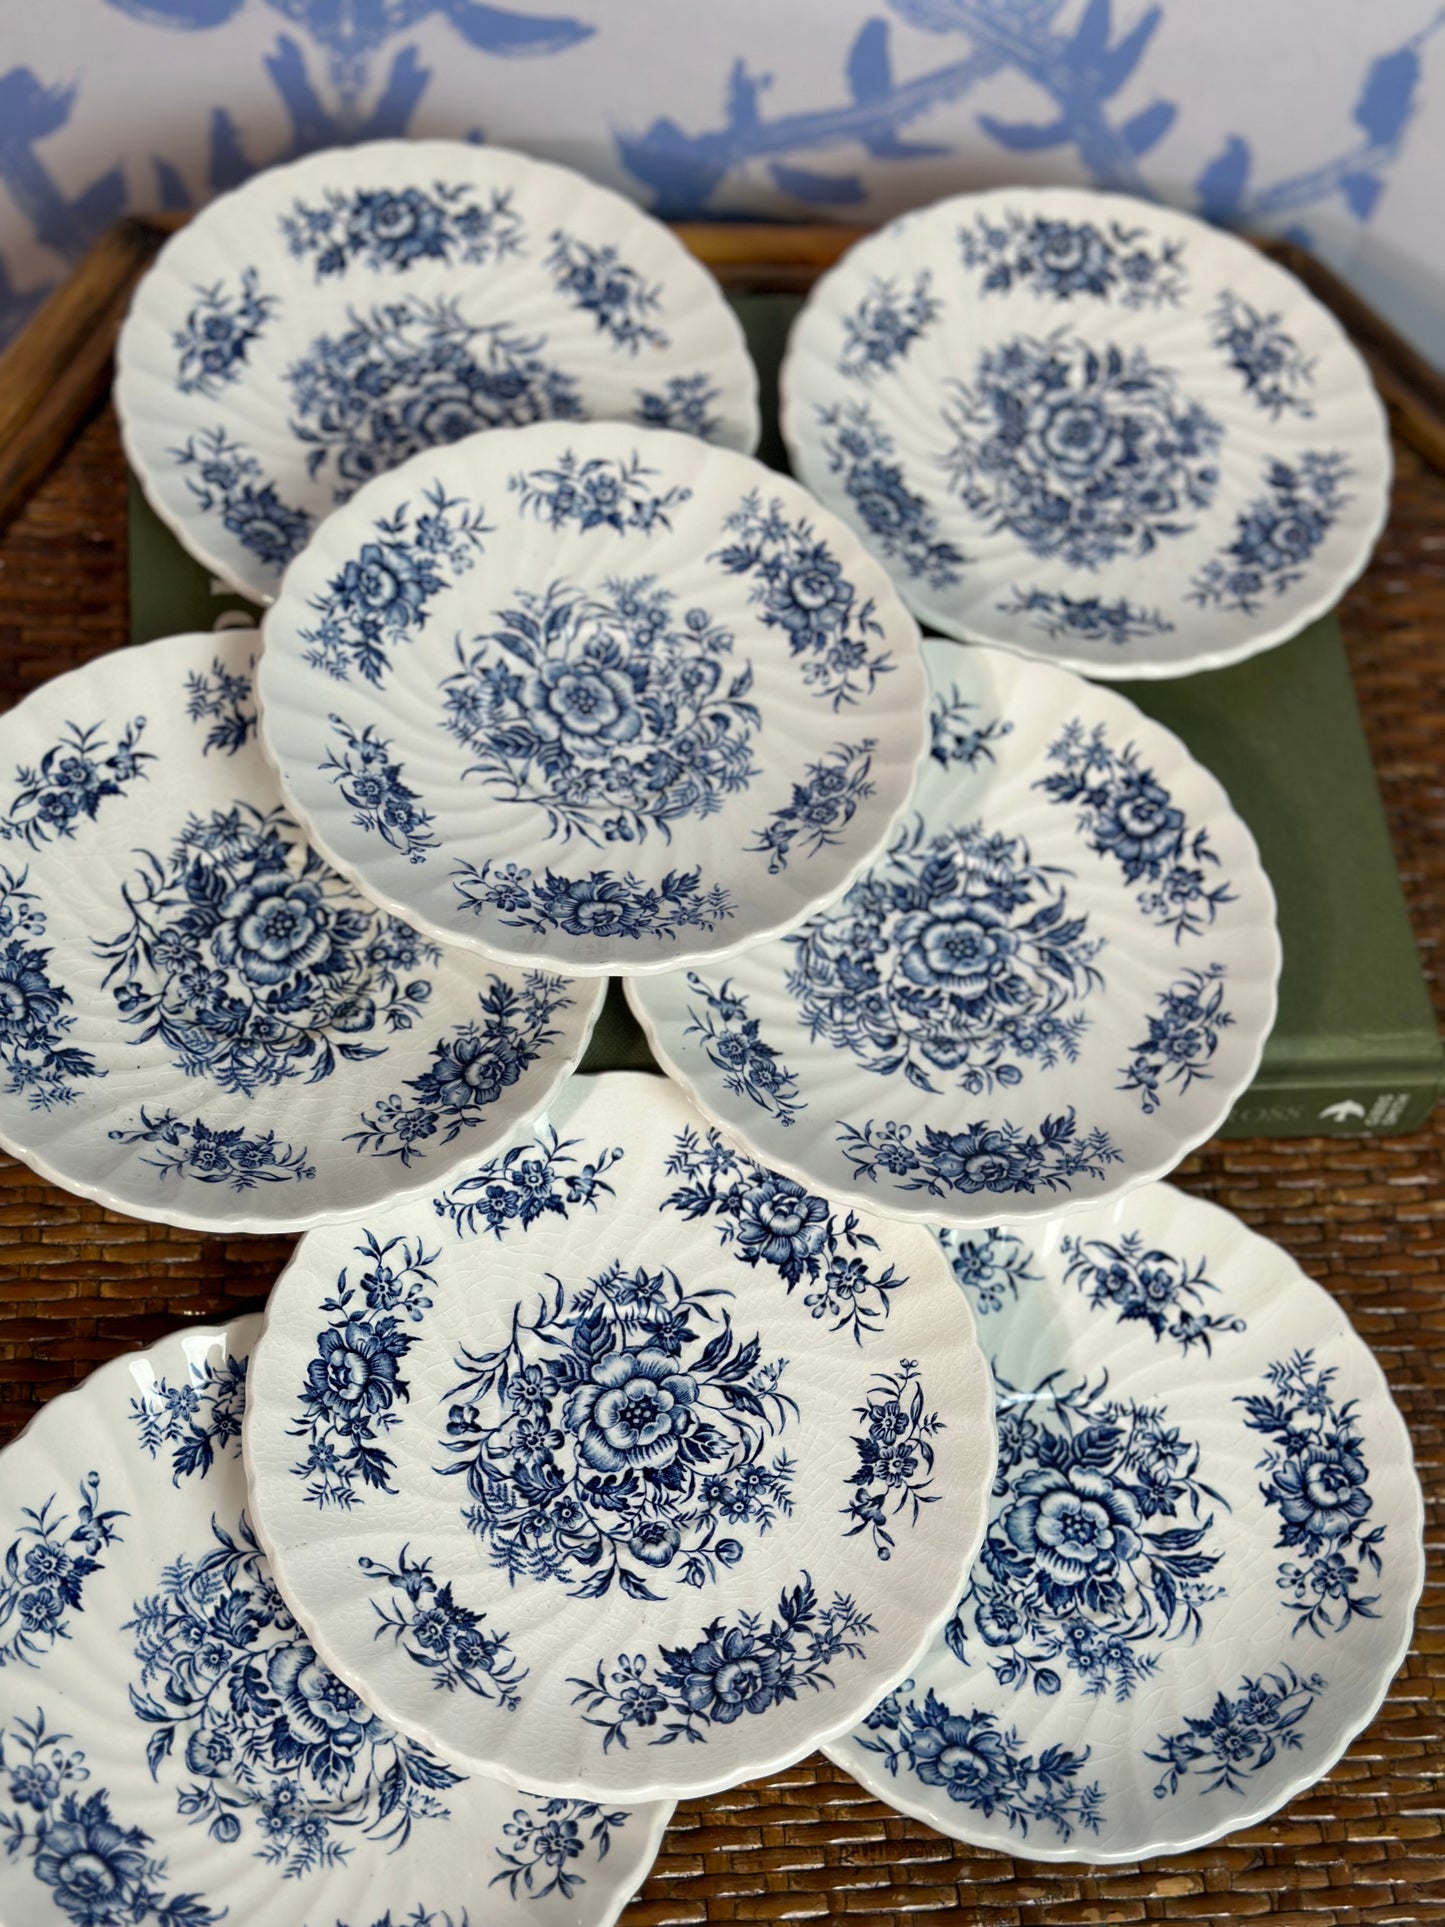 Vintage Blue & White Floral Saucers "Beacon Hill" Staffordshire, England (sold separate)